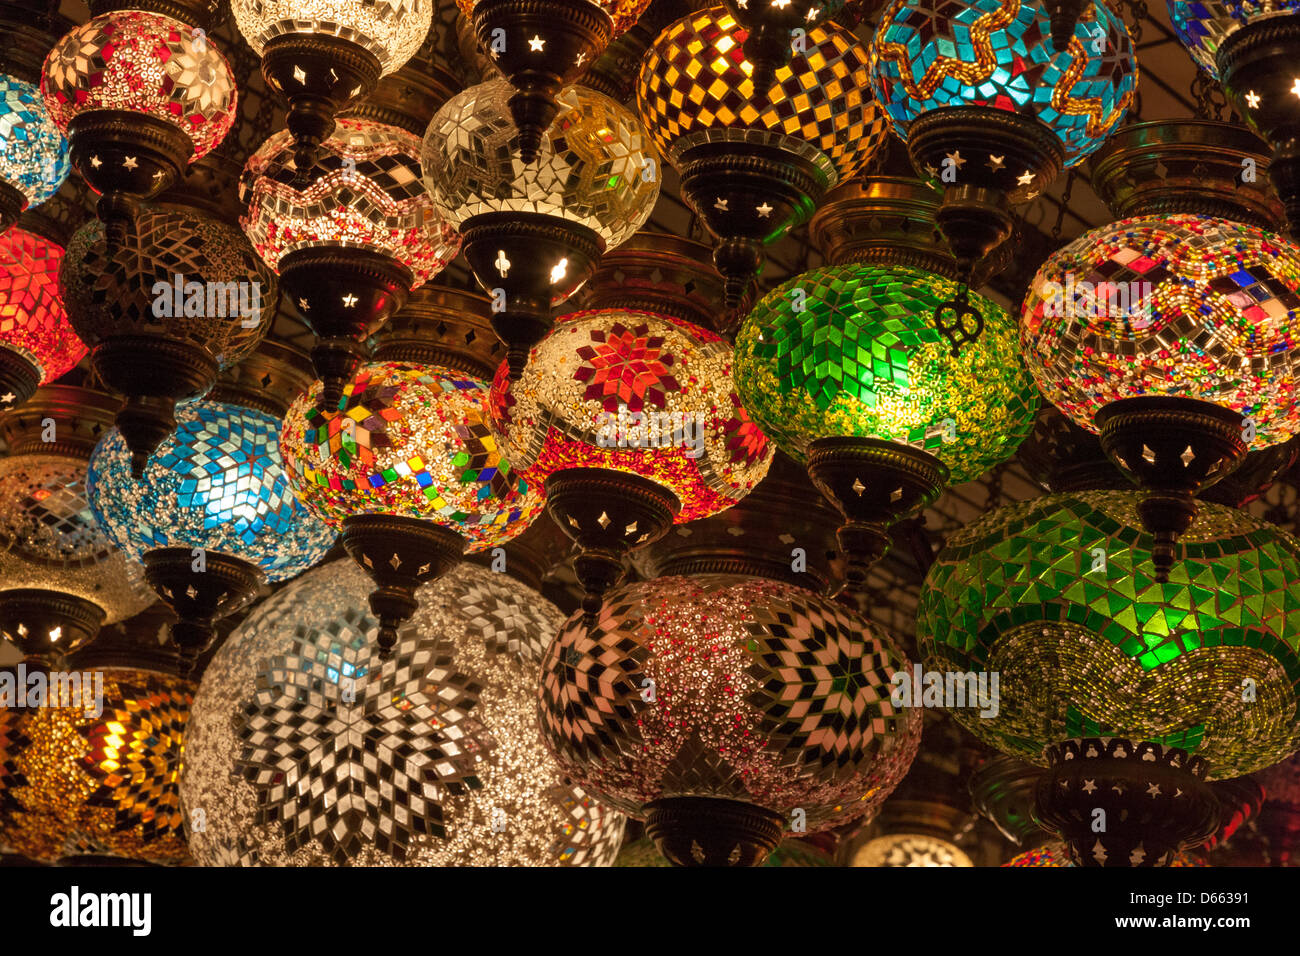 Turkish lanterns outside a shop in Istanbul Stock Photo